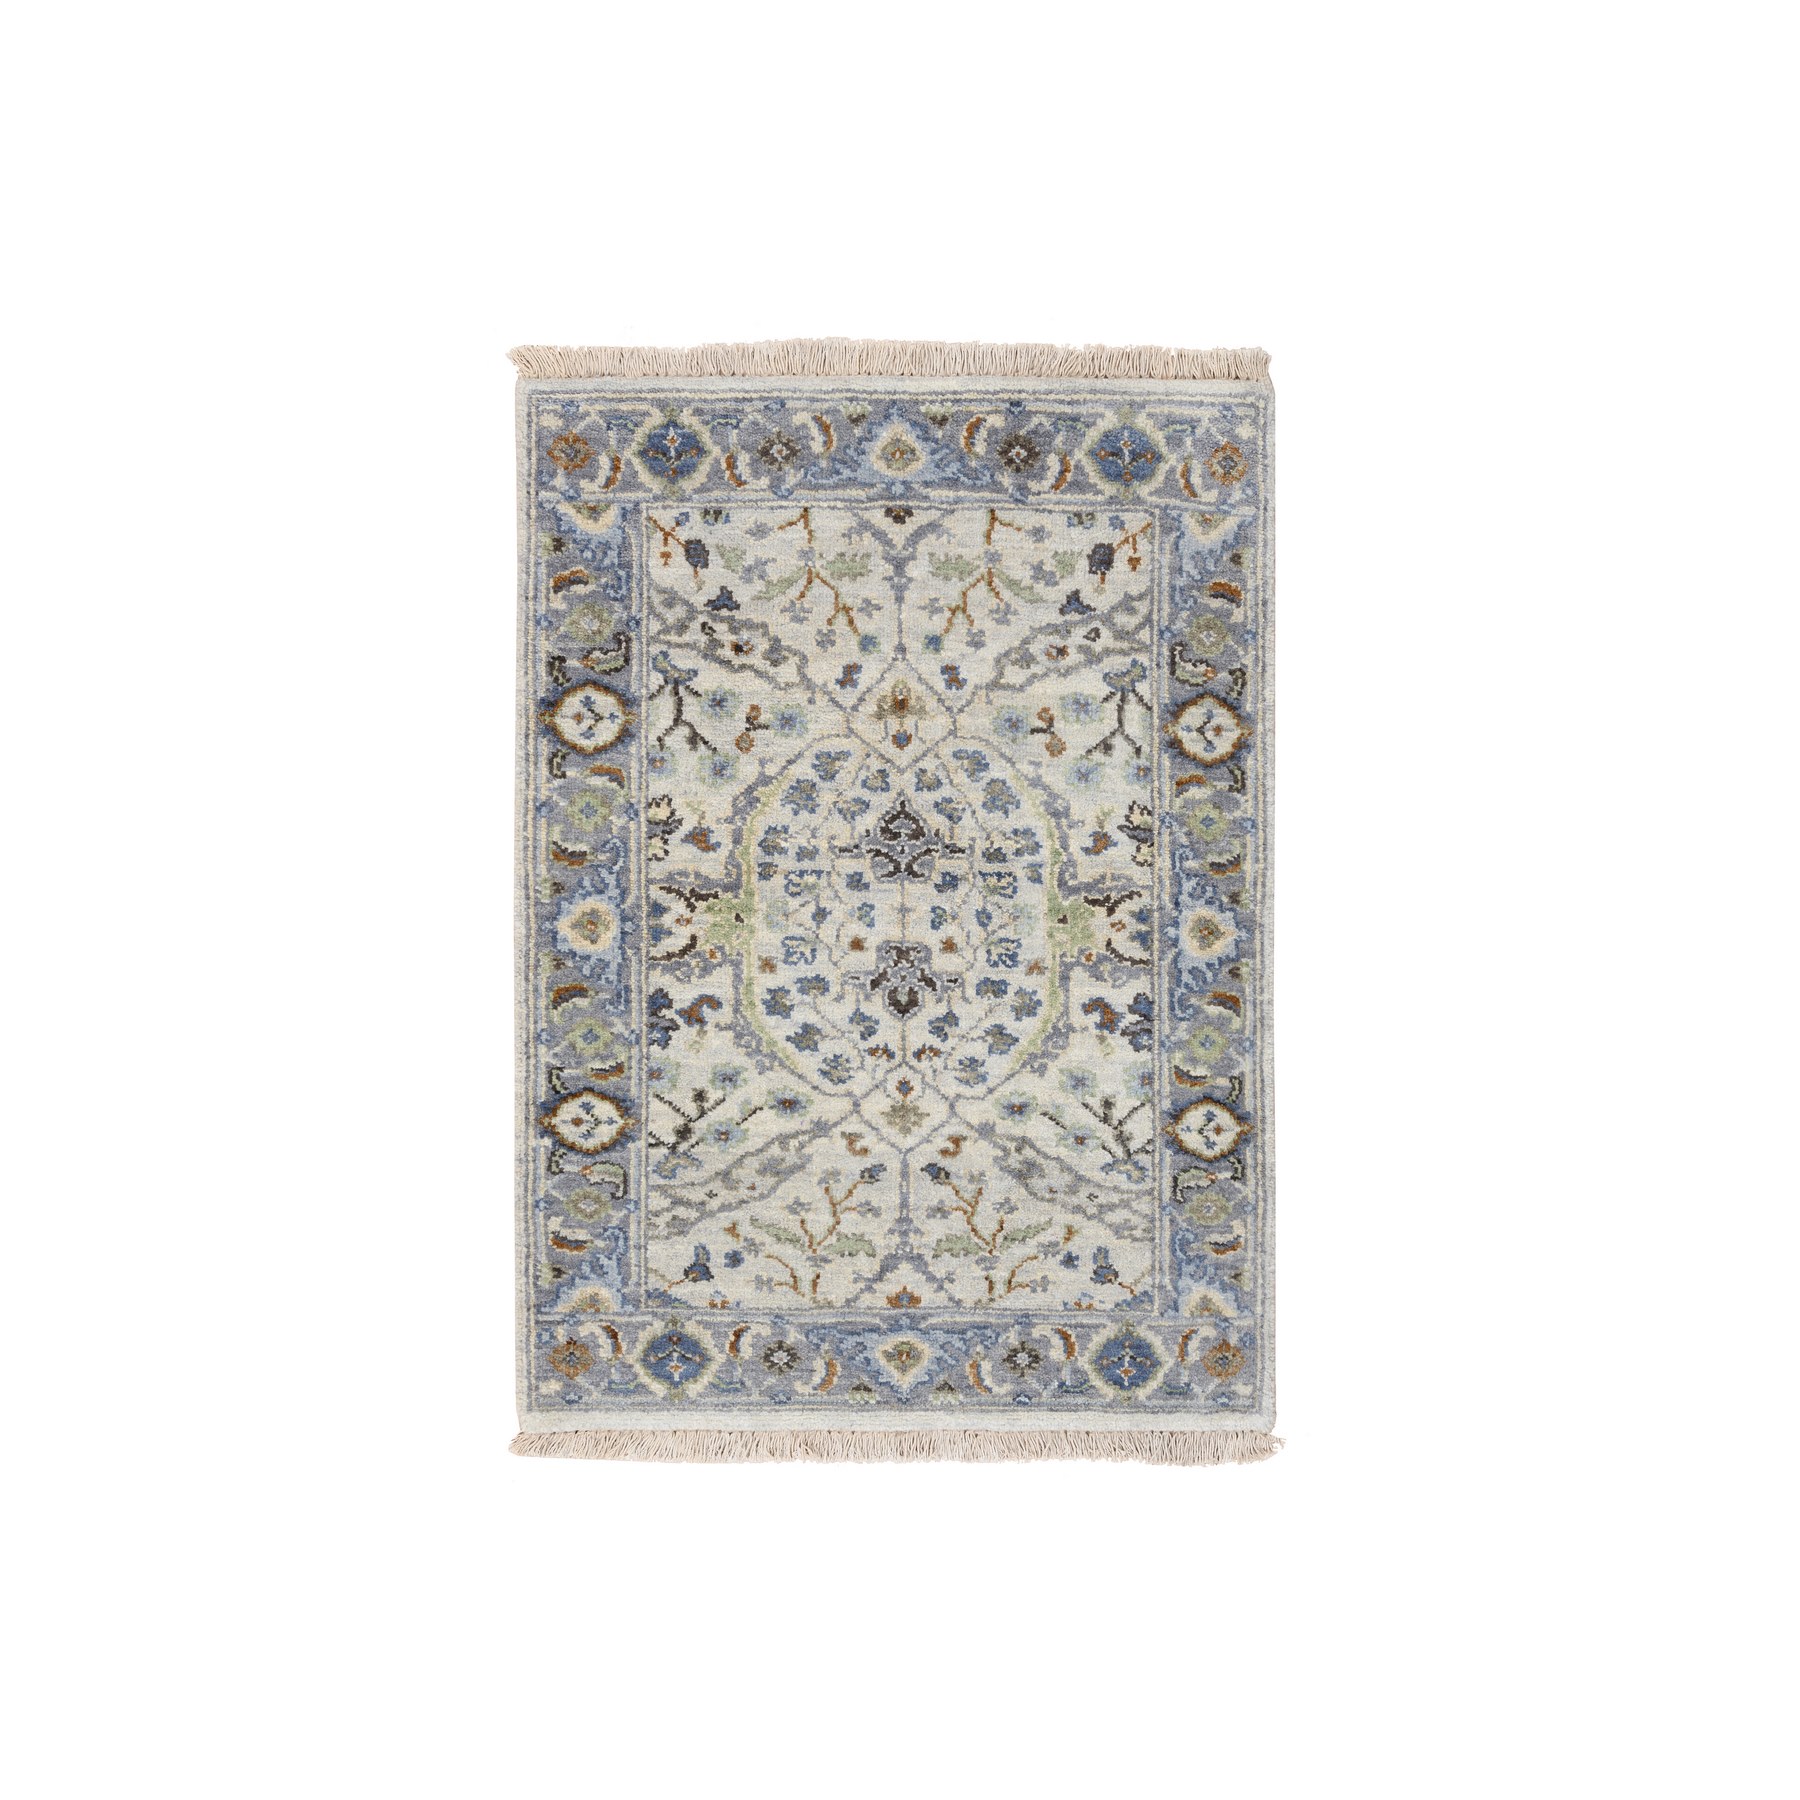 2'1"x3' Gray Oushak with All Over Design Dense Weave Wool Hand Woven Oriental Mat Rug 